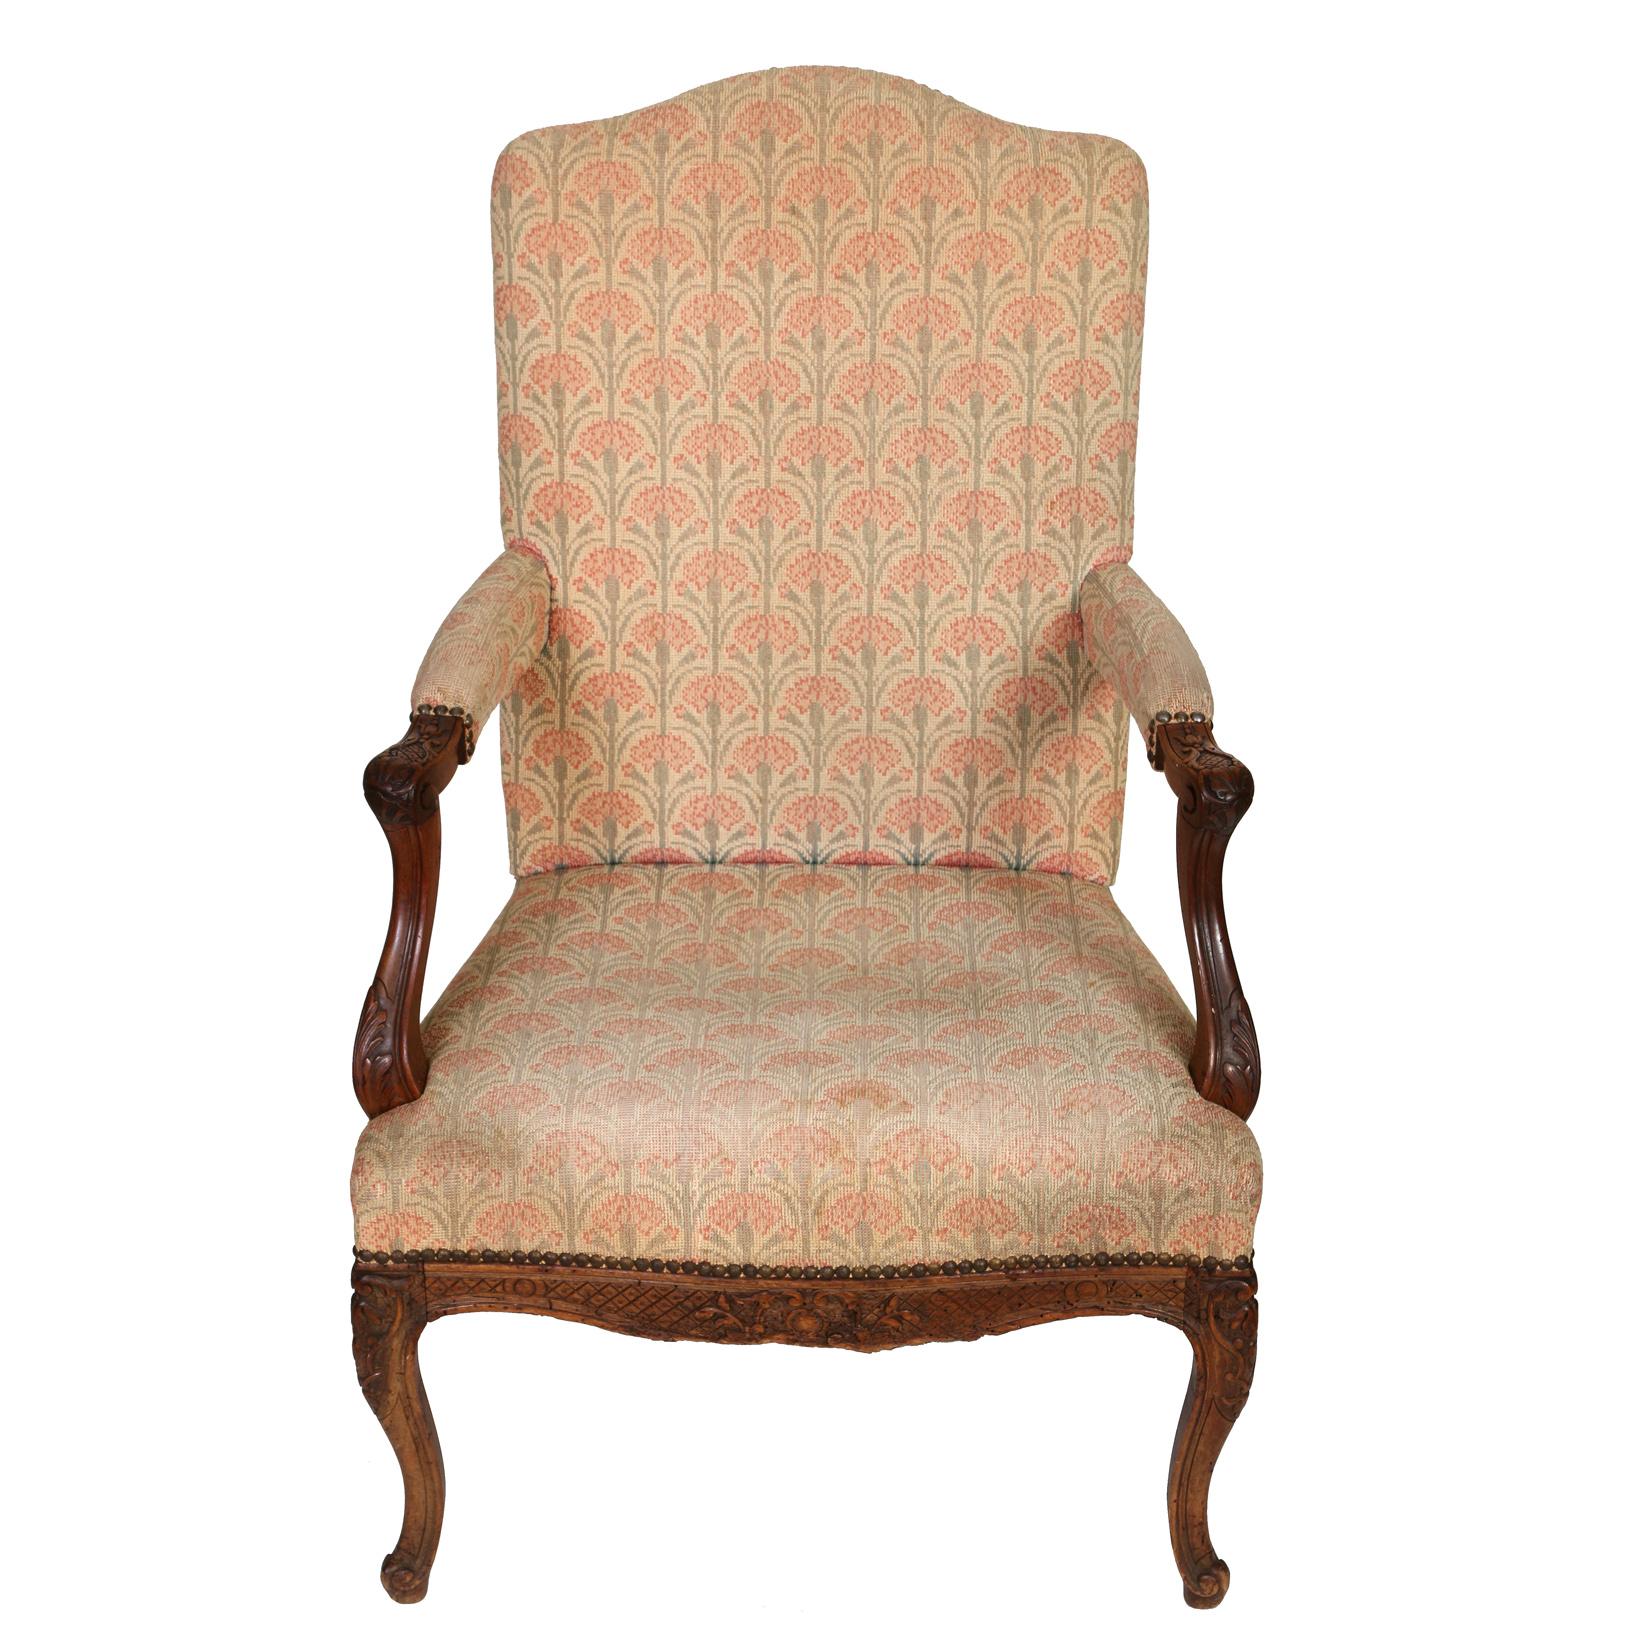 A pair of Regence style carved walnut upholstered fauteuil chairs with a pink carnation petit point tapestry upholstery to front and seat with nail head trim. Beautiful carved arms and cabriole legs